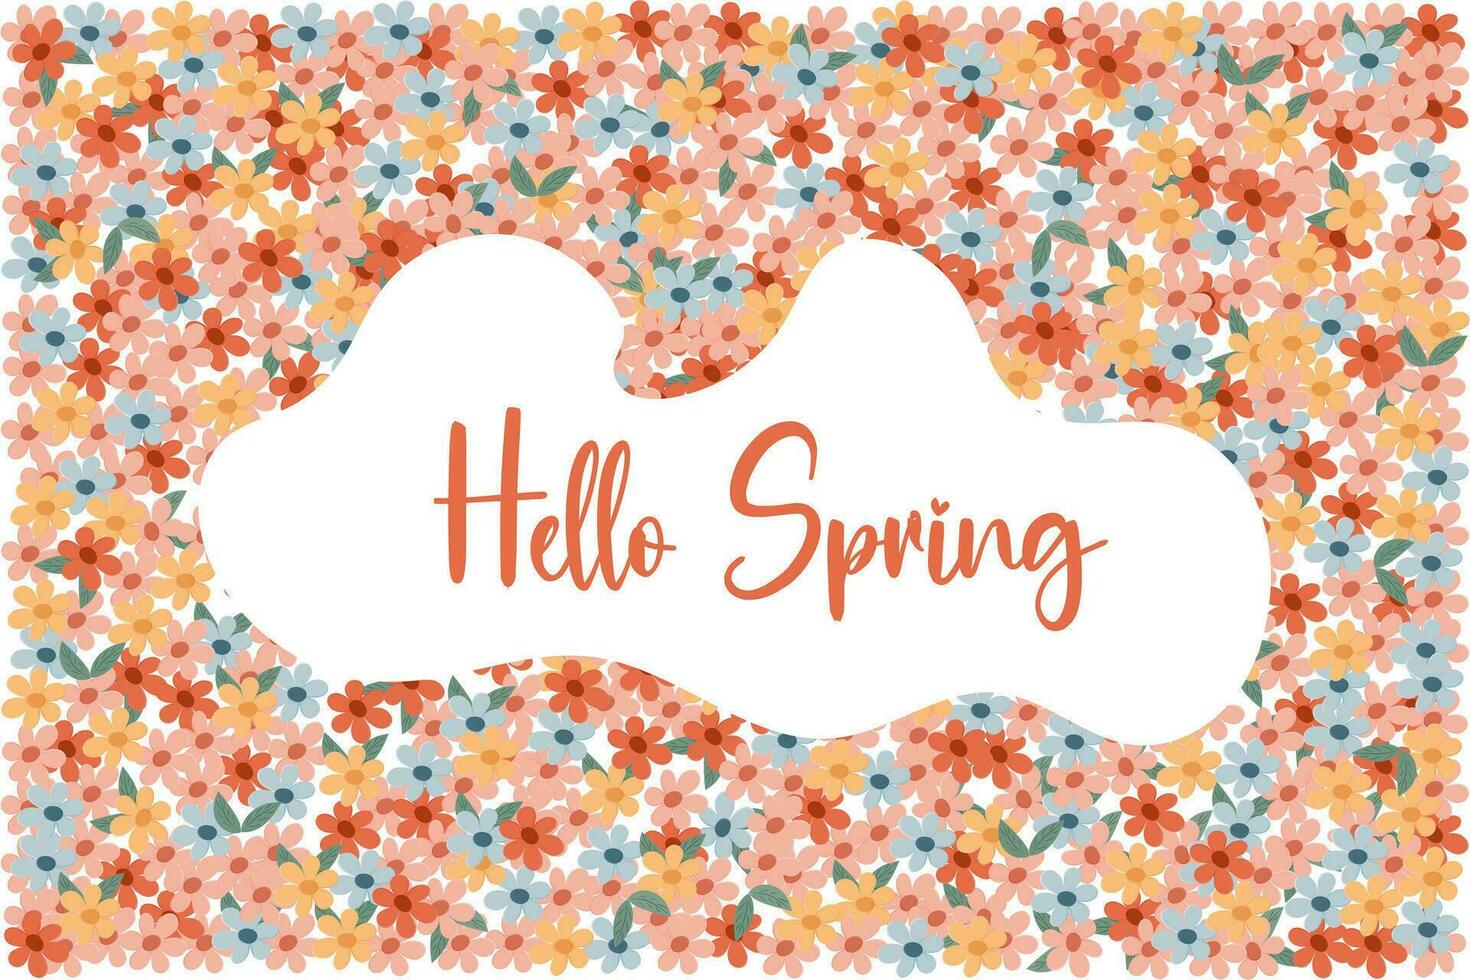 Hello spring, funny banner vector illustration. Seasonal wish with green leaves and flowers for spring holiday greeting card design